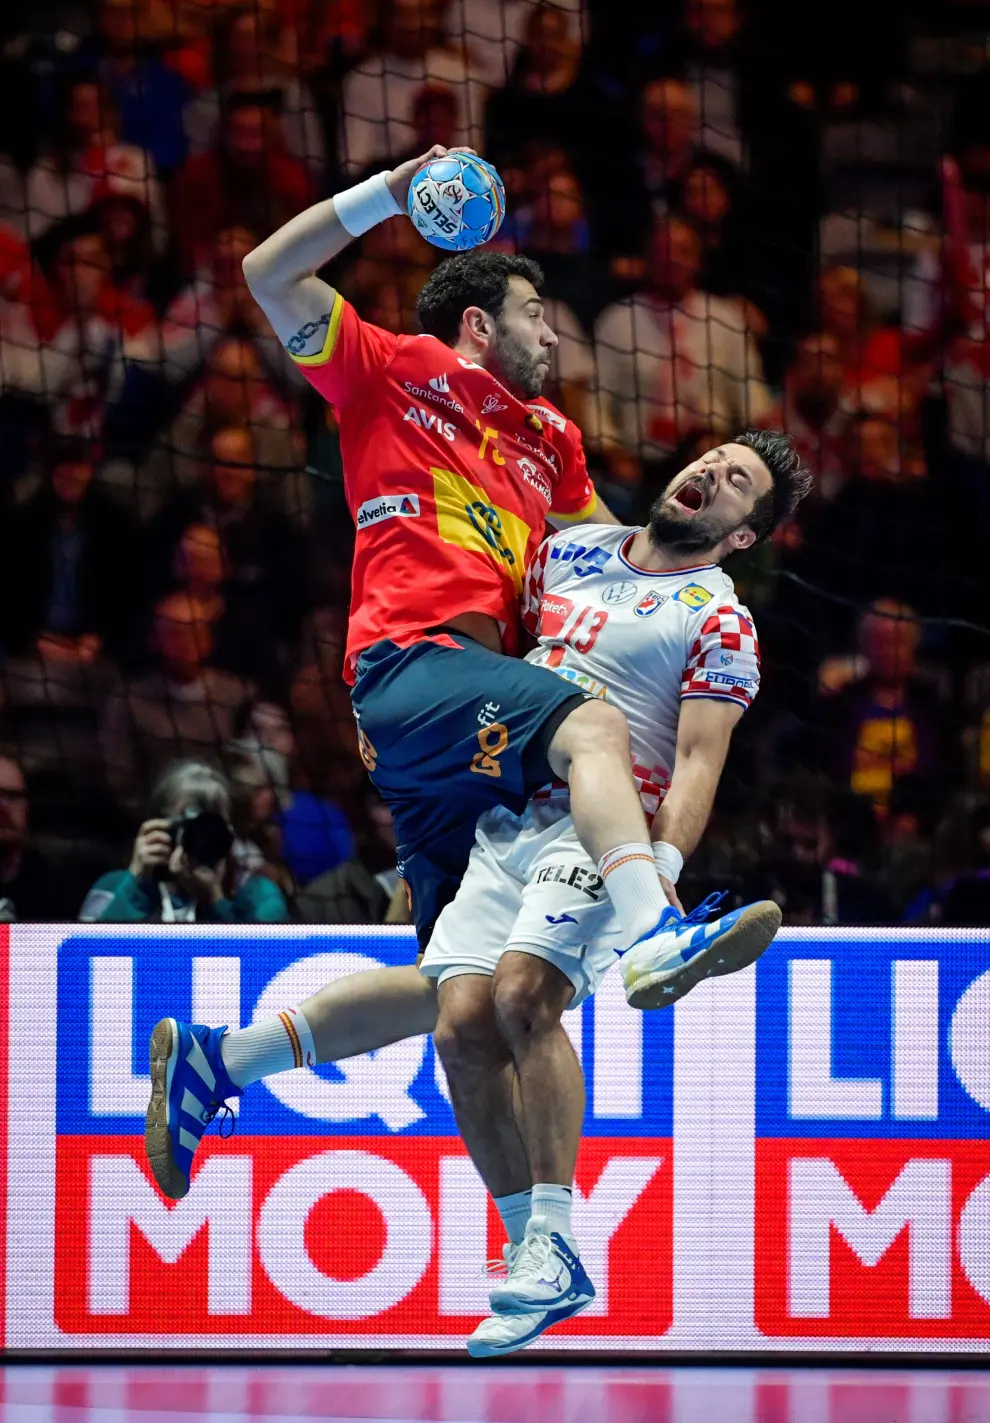 2020 European Handball Championship - Final - Spain v Croatia - Stockholm, Sweden - January 26, 2020 - Spain's Iosu Goni Leoz and Croatia's Zlatko Horvat in action . Anders Wiklund/TT News Agency/via REUTERS ATTENTION EDITORS - THIS IMAGE WAS PROVIDED BY A THIRD PARTY. SWEDEN OUT. NO COMMERCIAL OR EDITORIAL SALES IN SWEDEN. [[[REUTERS VOCENTO]]]